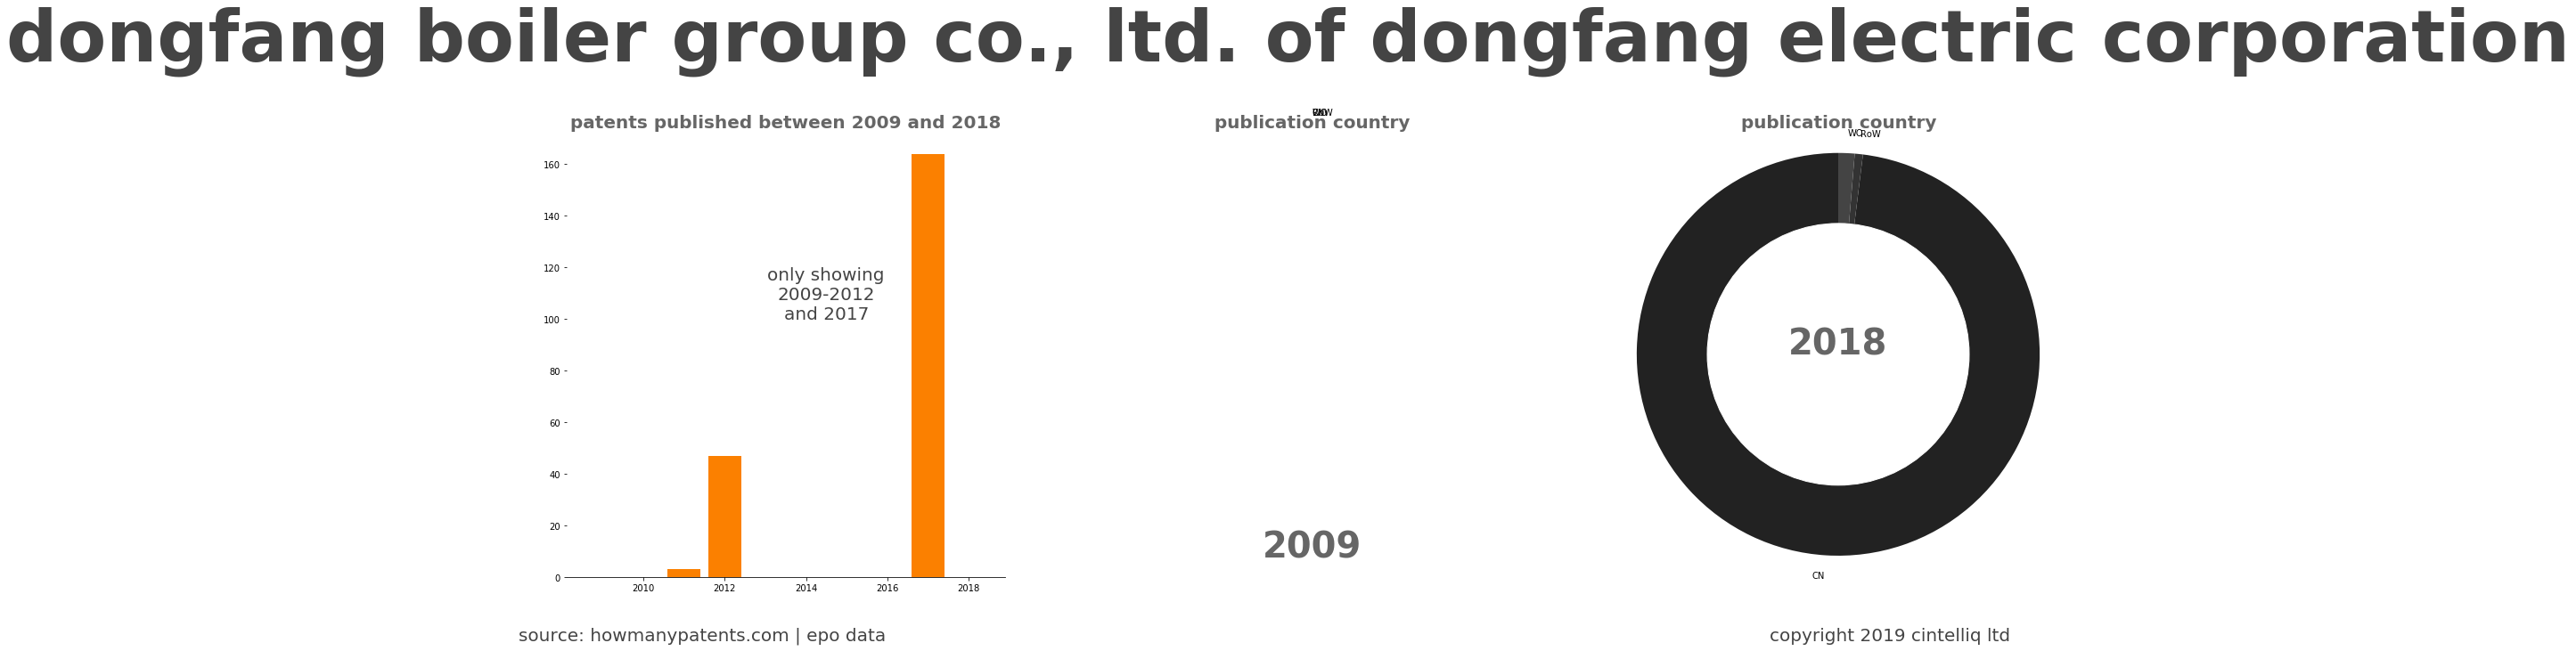 summary of patents for Dongfang Boiler Group Co., Ltd. Of Dongfang Electric Corporation